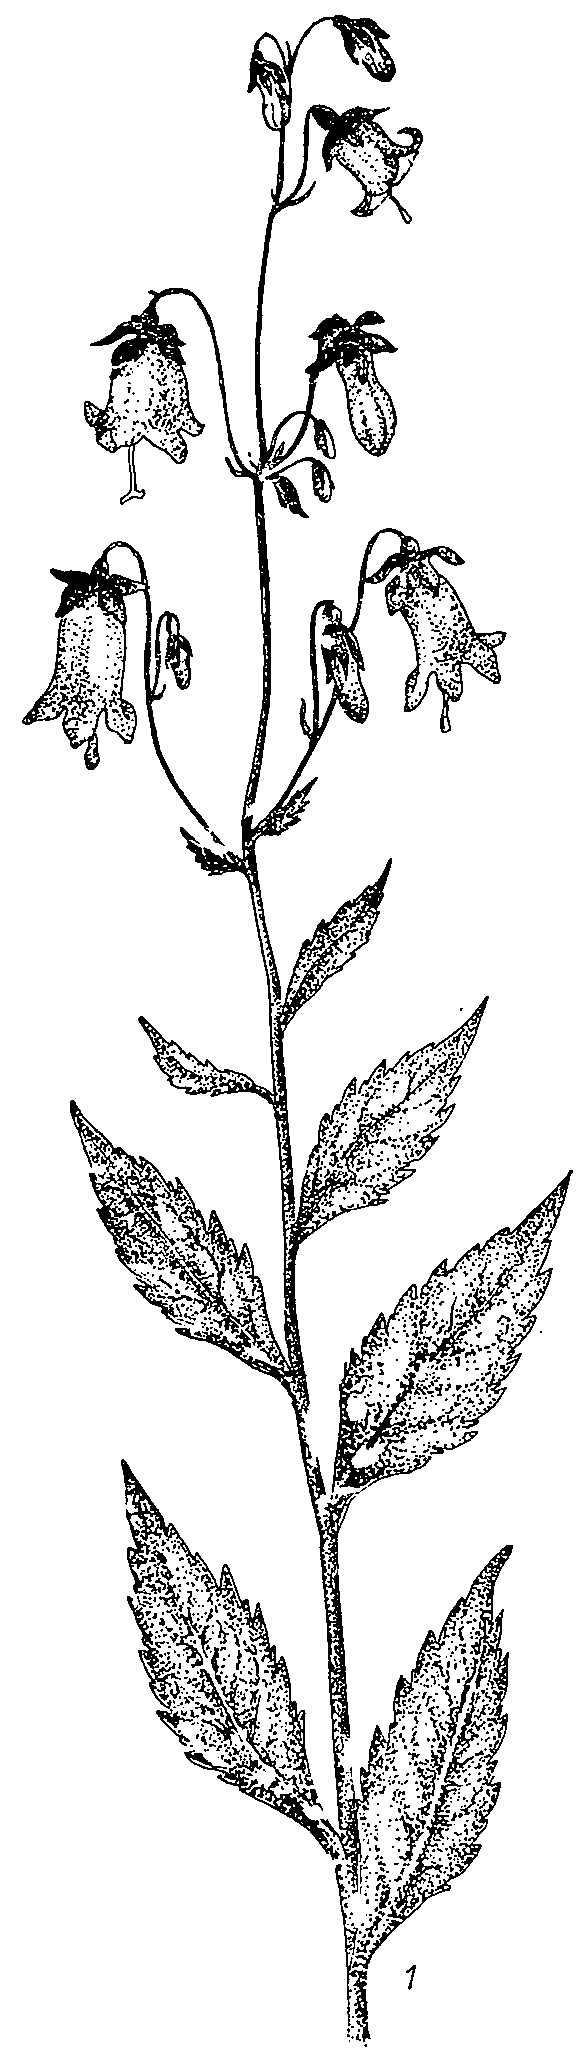 Adenophora_sublata_3a.png